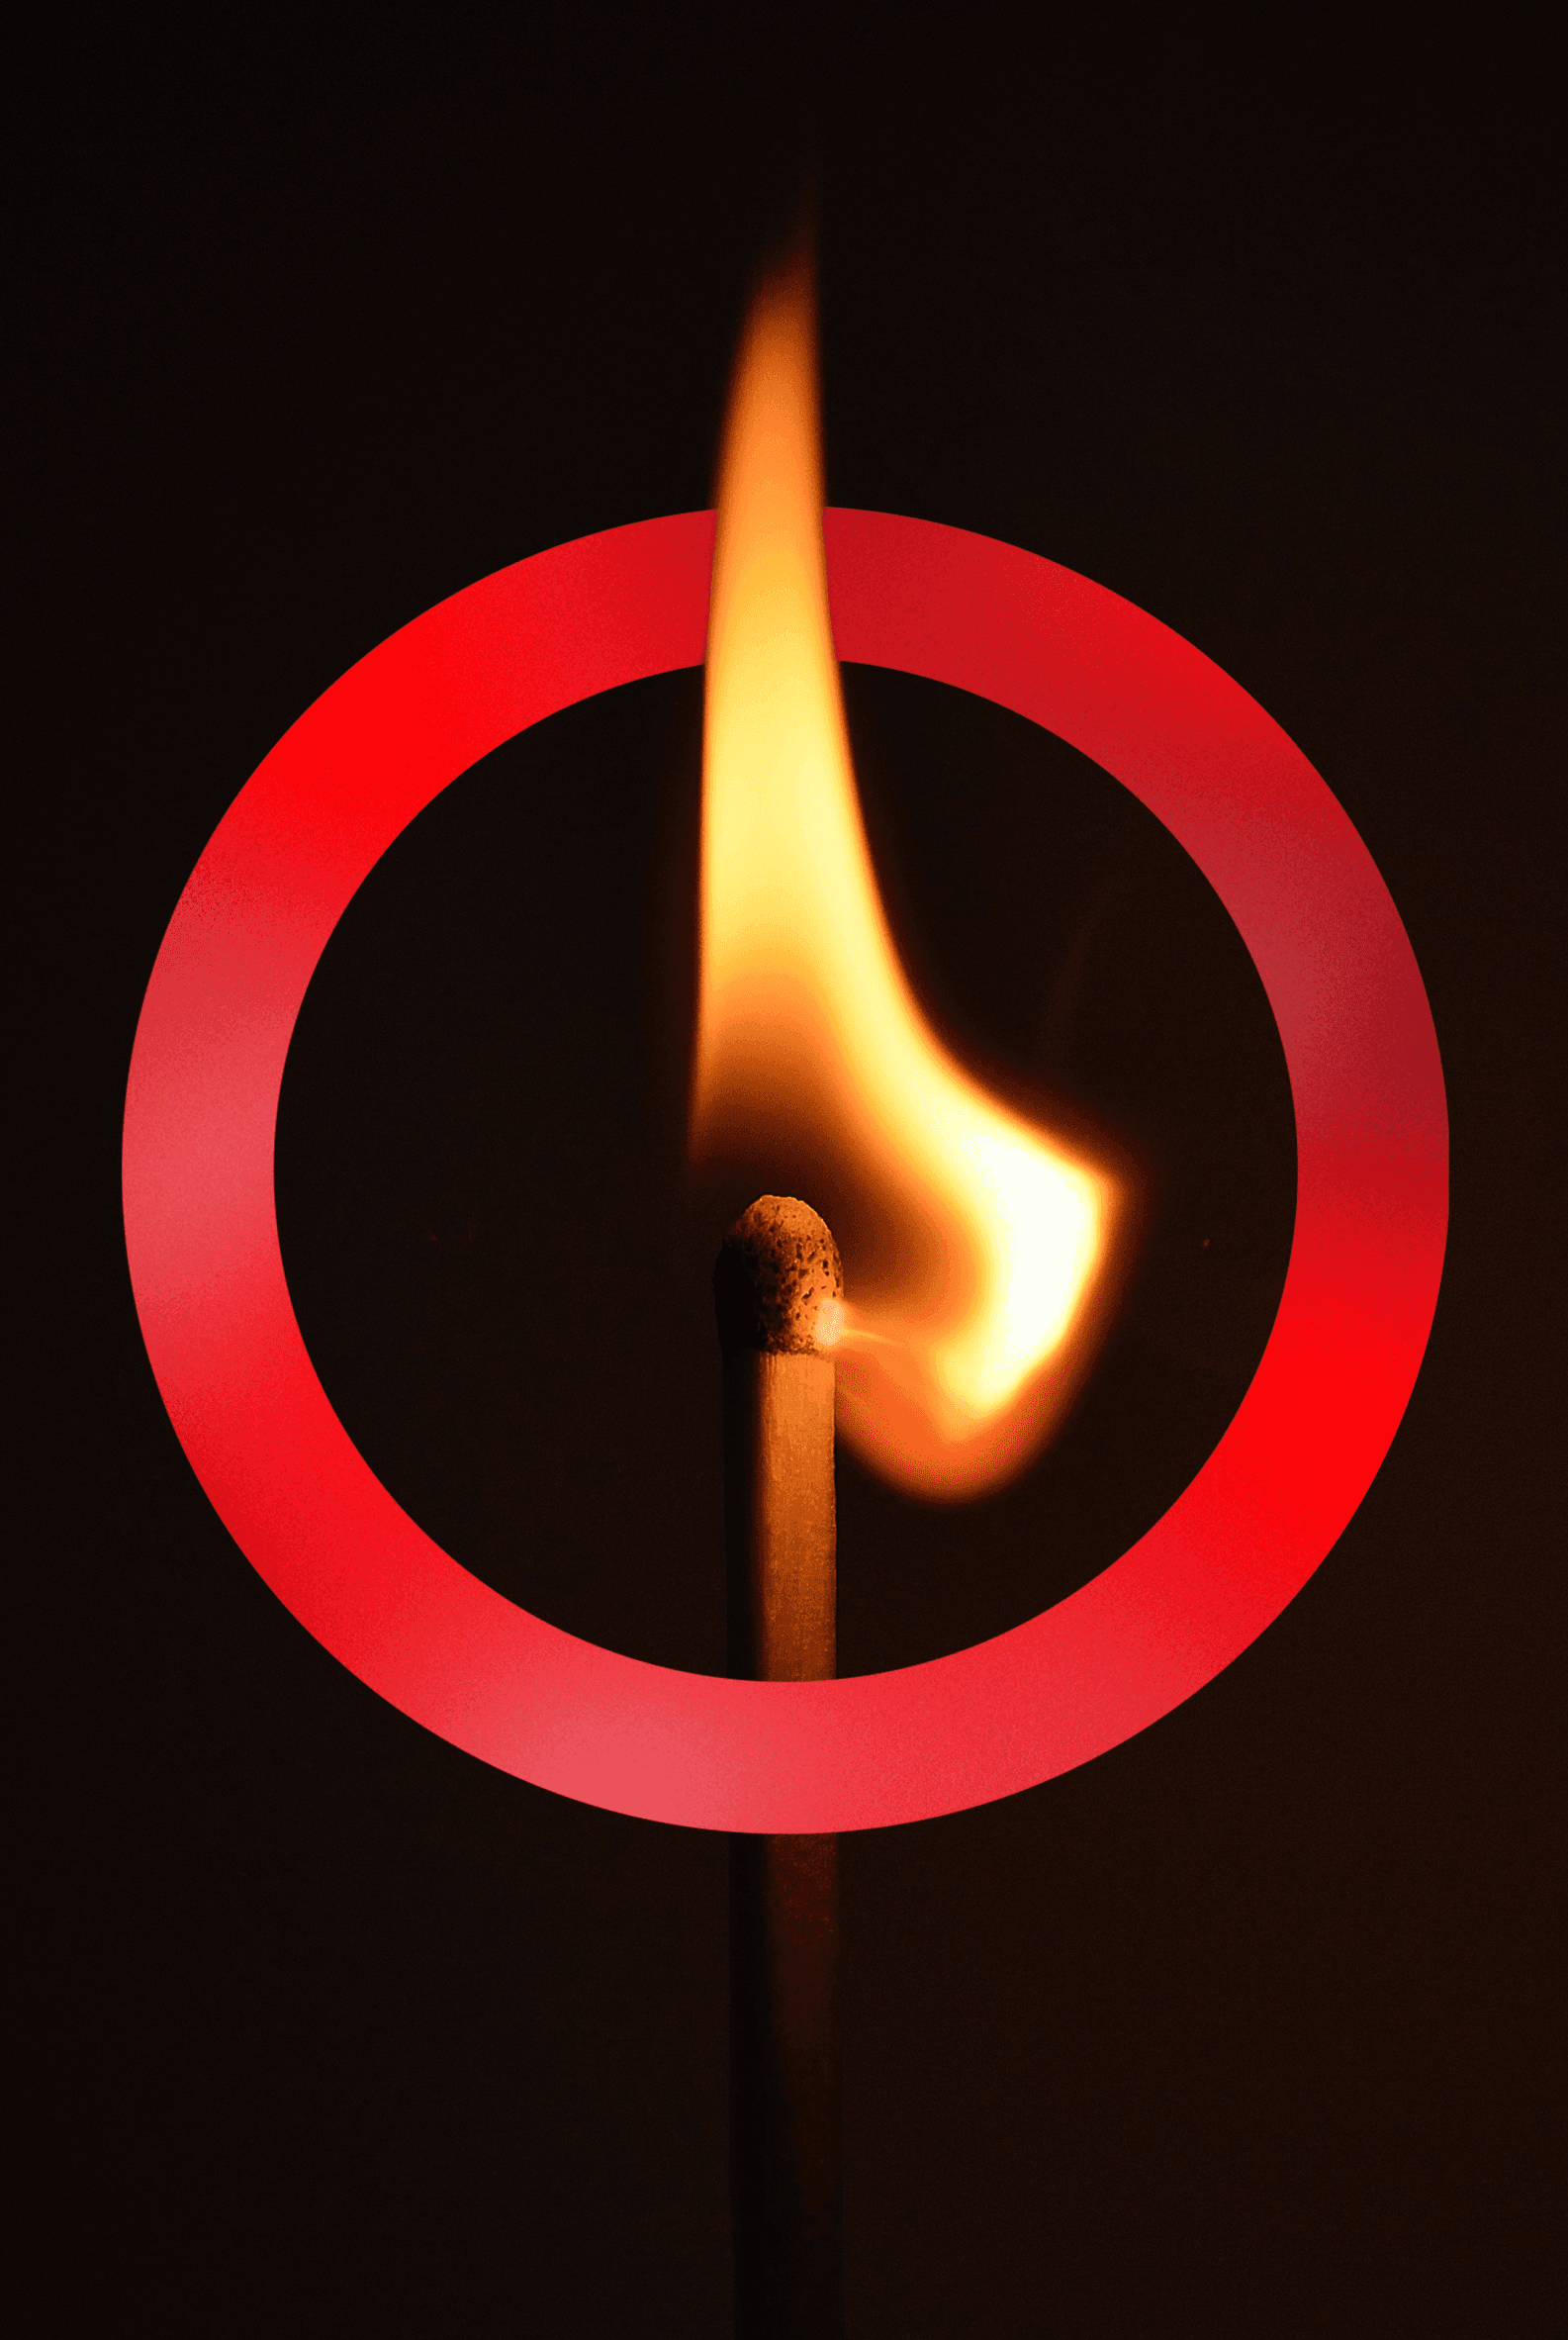 Flame with red circle